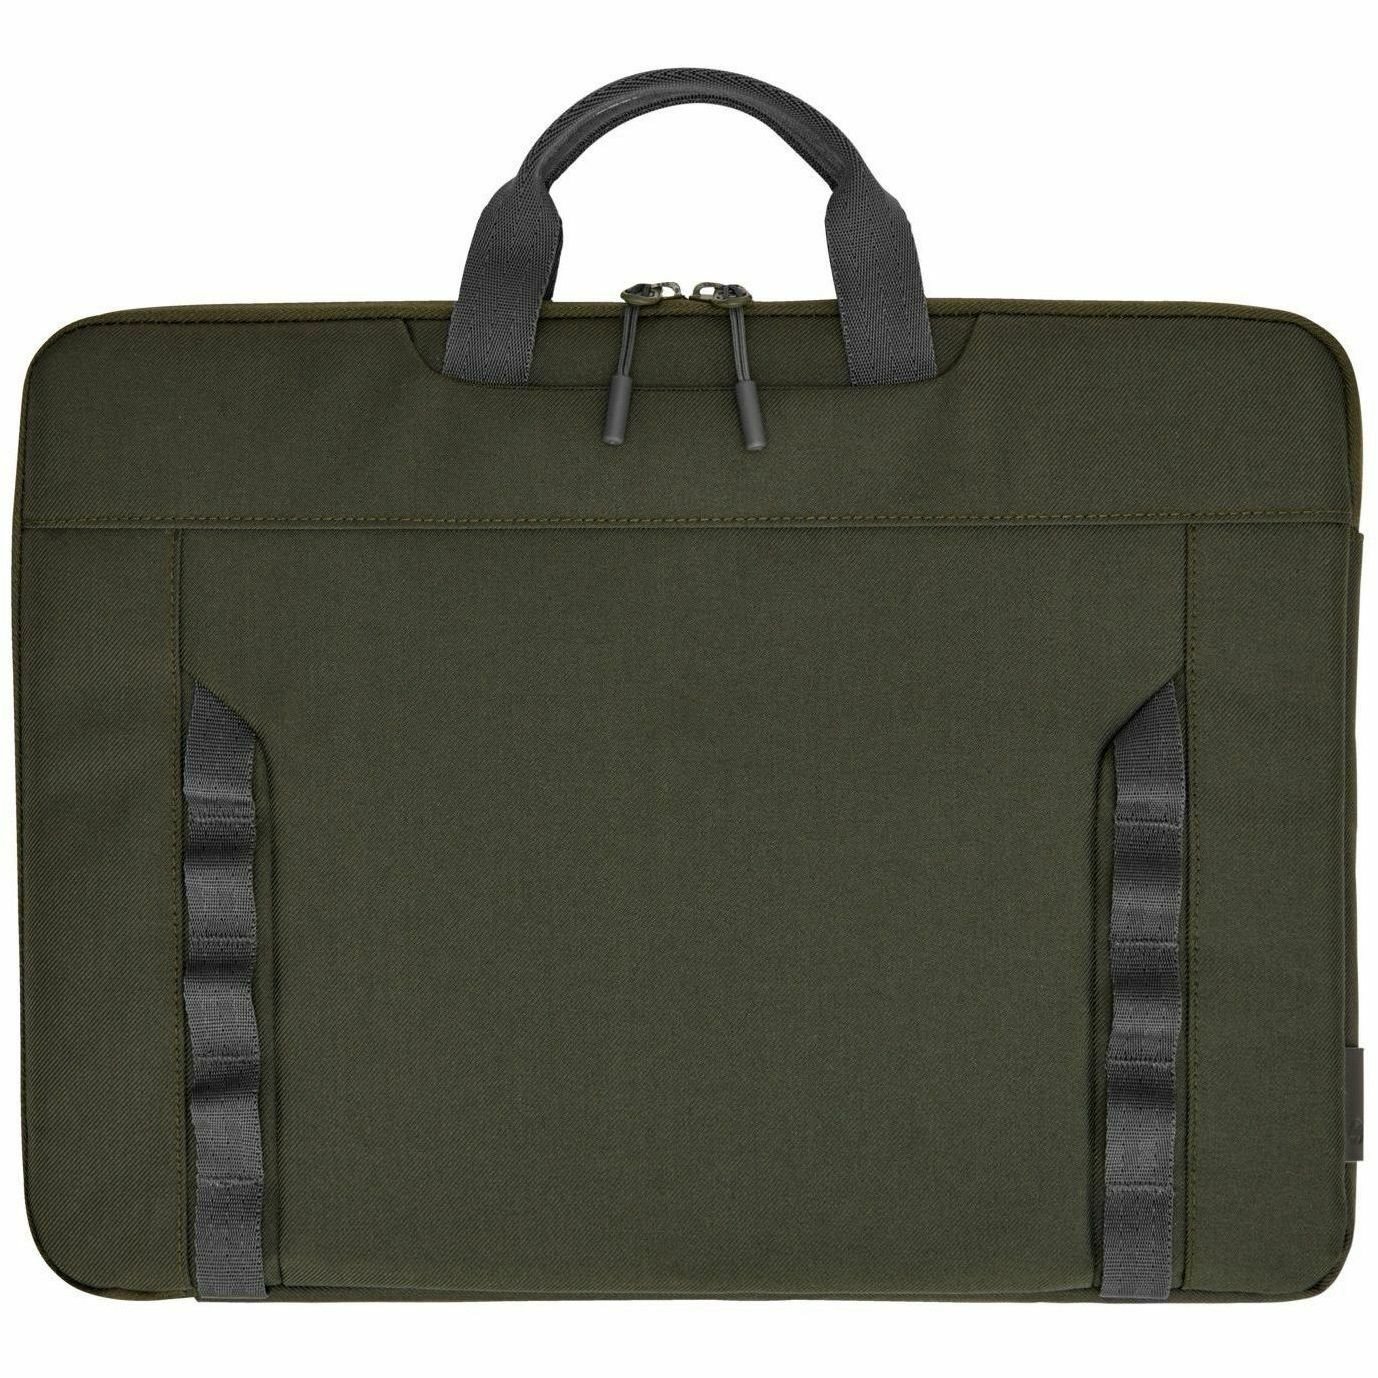 HP Carrying Case (Sleeve) for 15.6" Notebook - Gray, Green